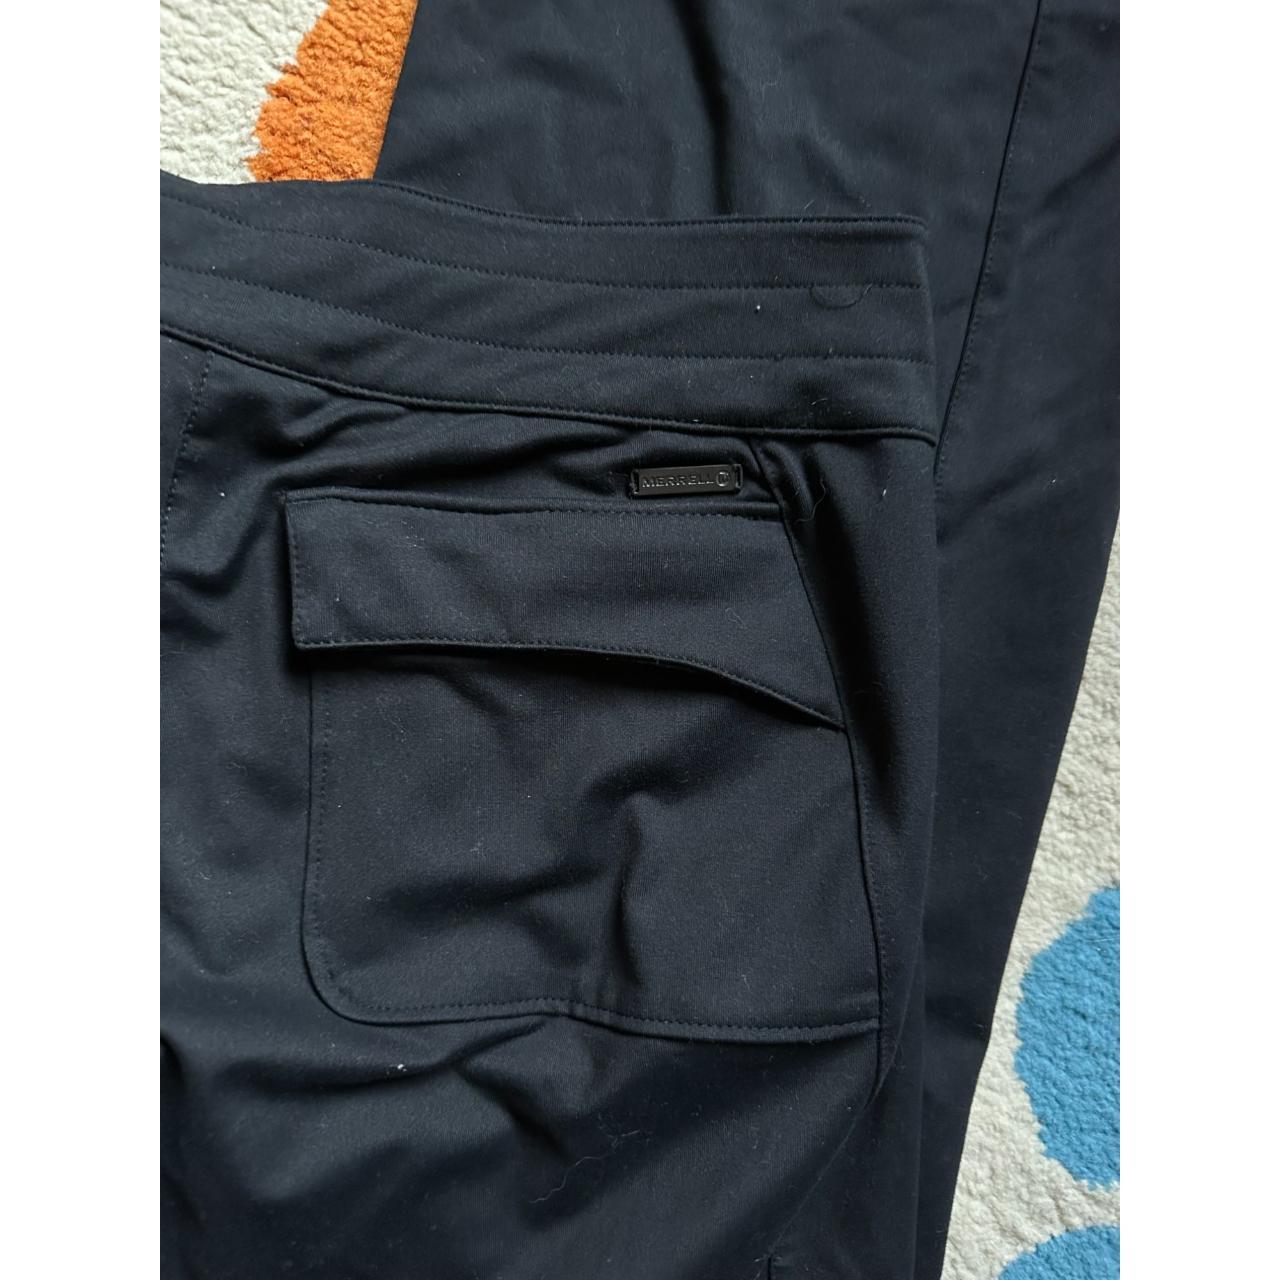 Merrell Hiking Pants, Sports Equipment, Hiking & Camping on Carousell